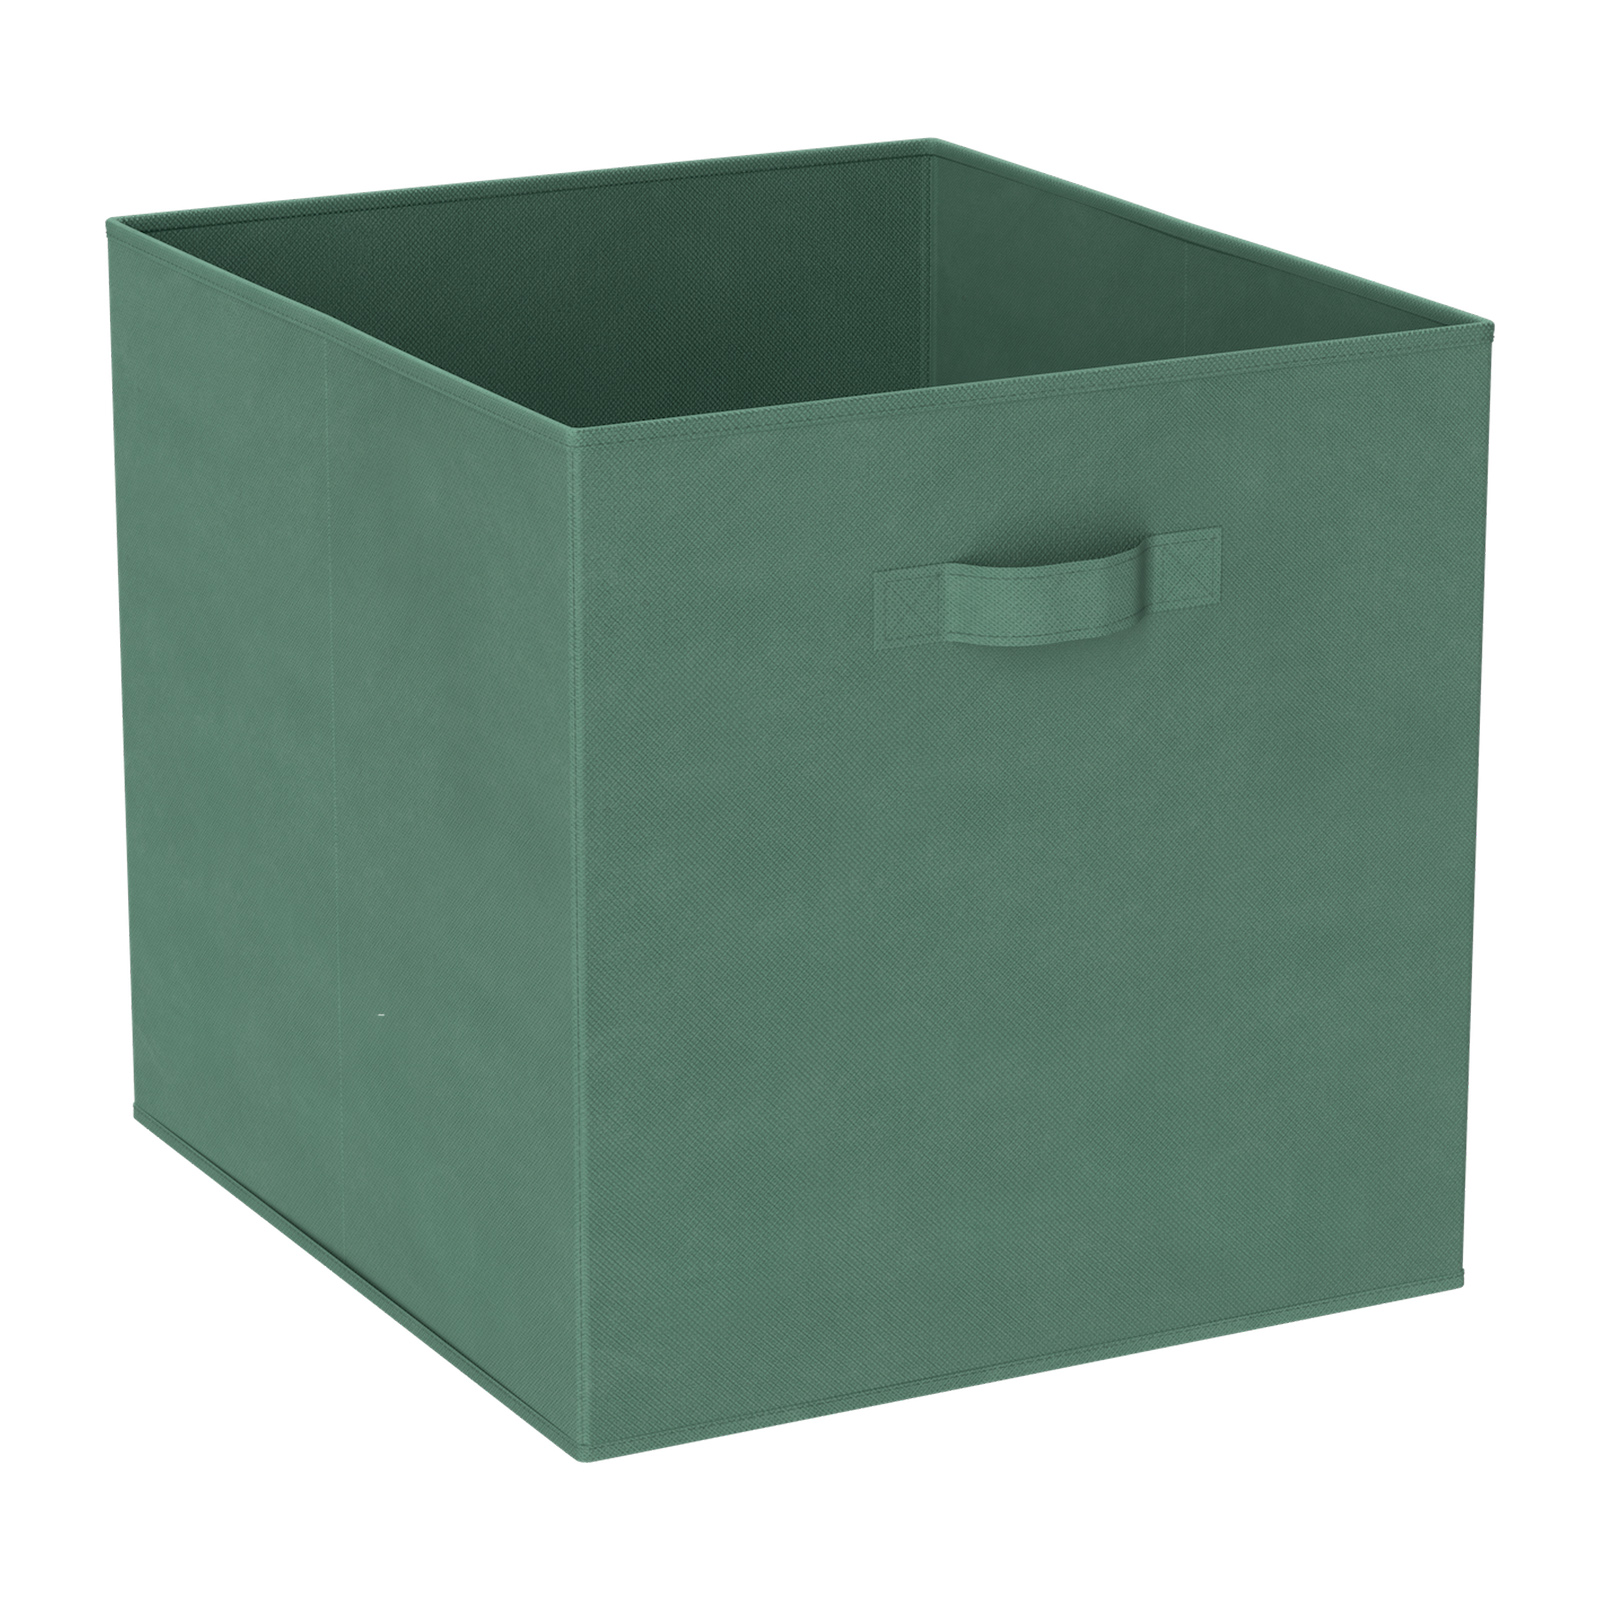 Clever Cube Hedge Green Fabric Insert